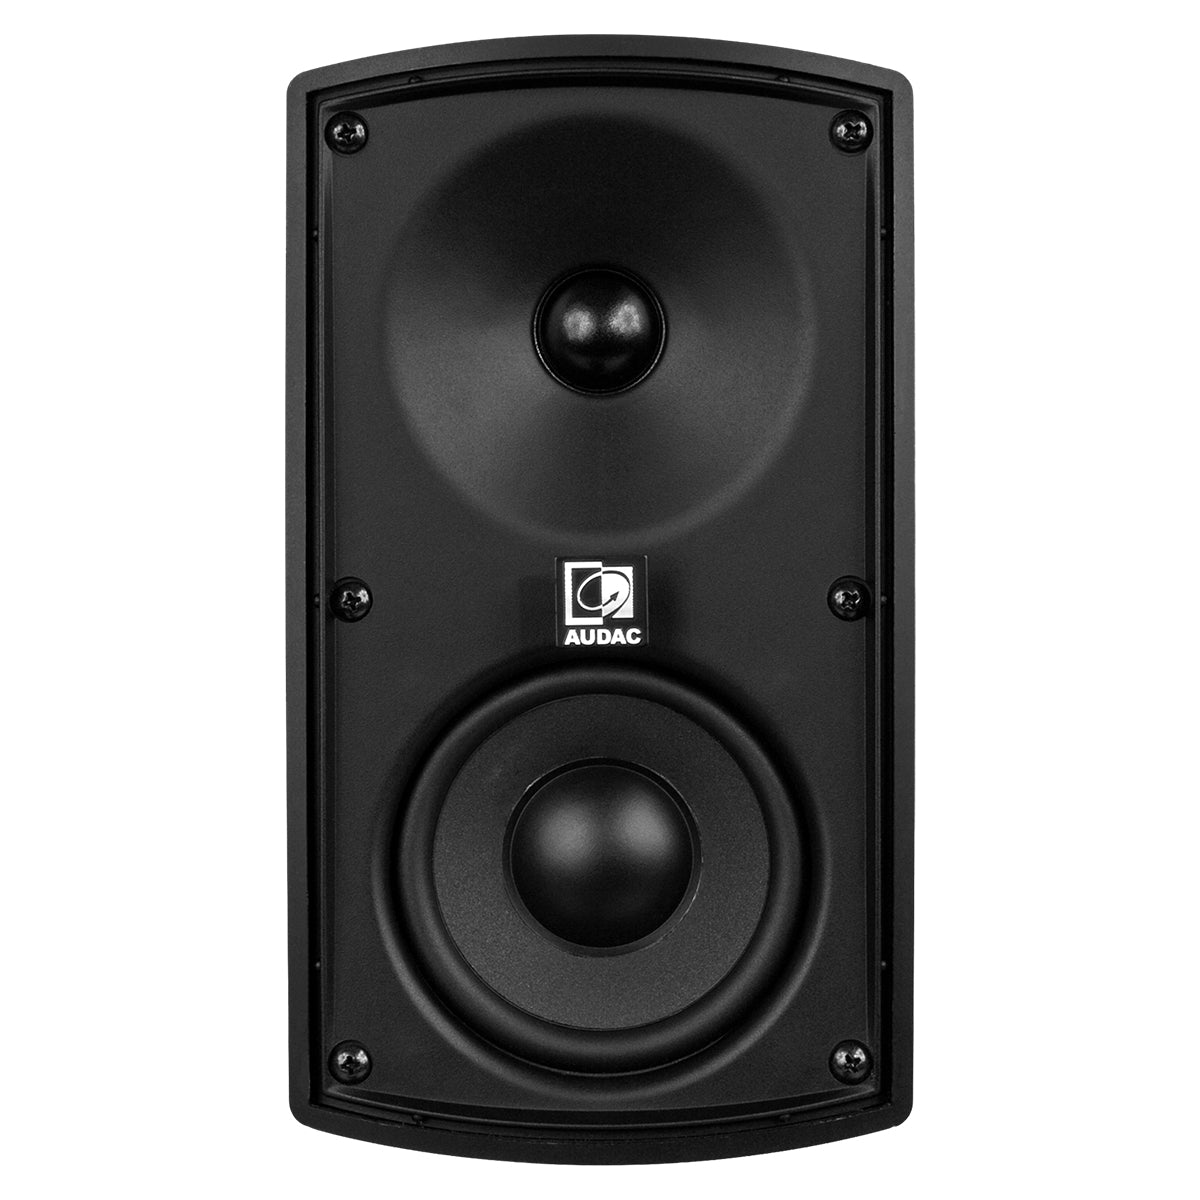 Audac ATEO4D Wall speaker with CleverMount 4" Black version - 16ohm